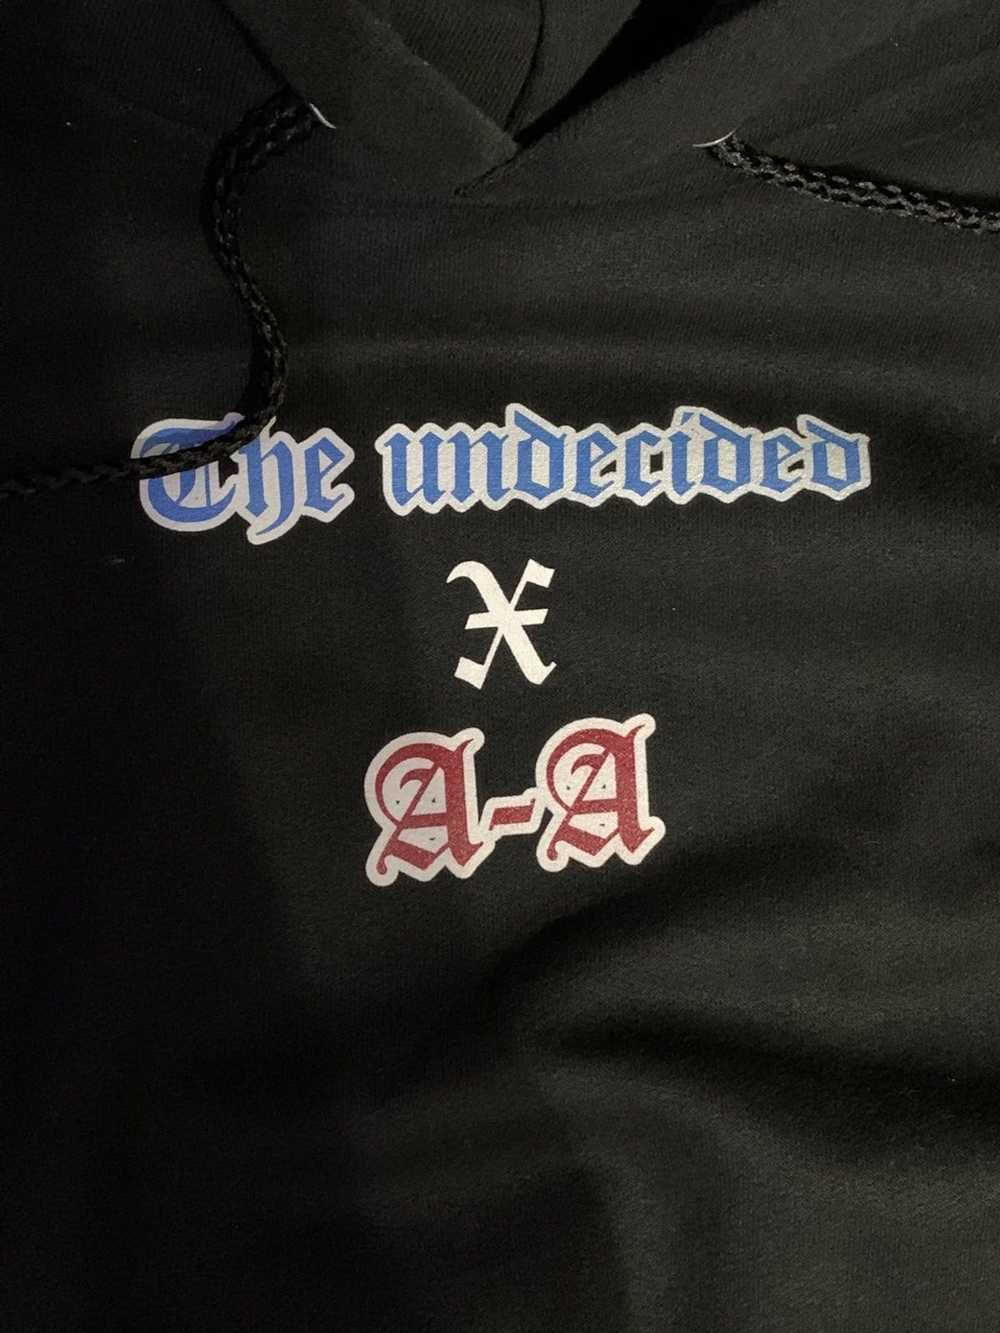 Other Unknown brand hoodie - image 2